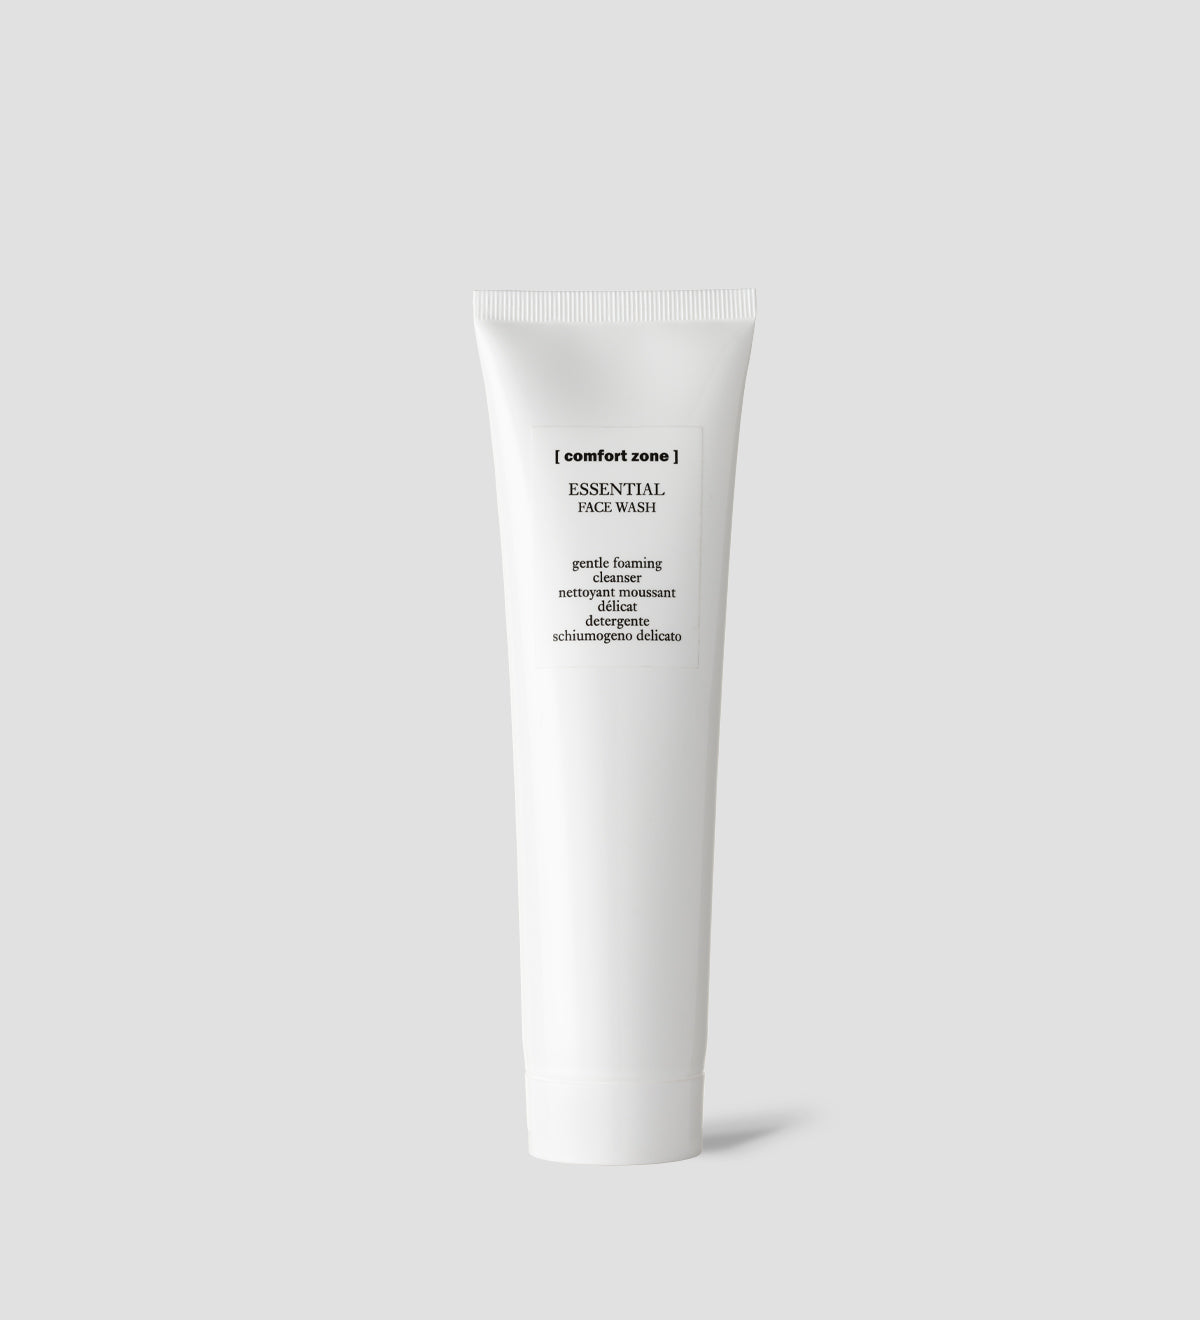 Comfort Zone: REMEDY CREAM TO OIL Ultra gentle cleanser-